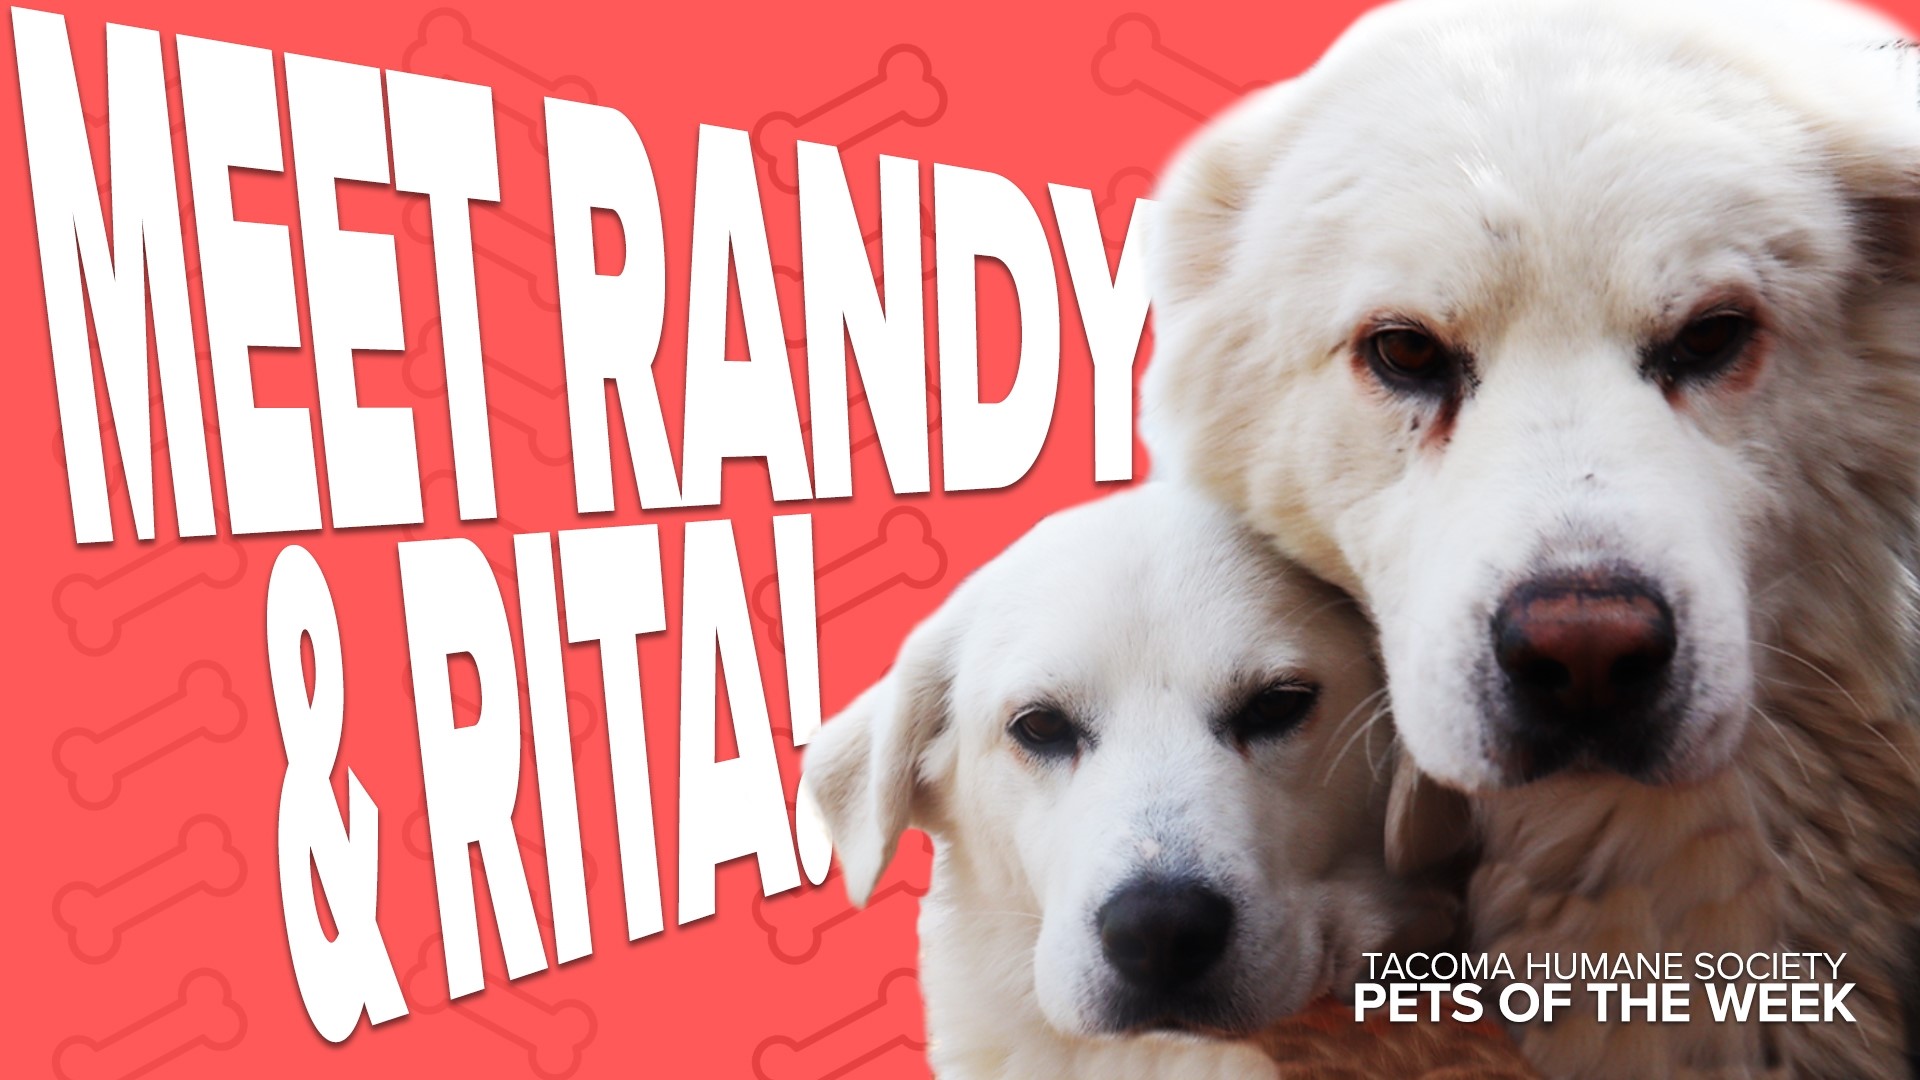 This week's featured adoptable pets of the week are Randy and Rita!